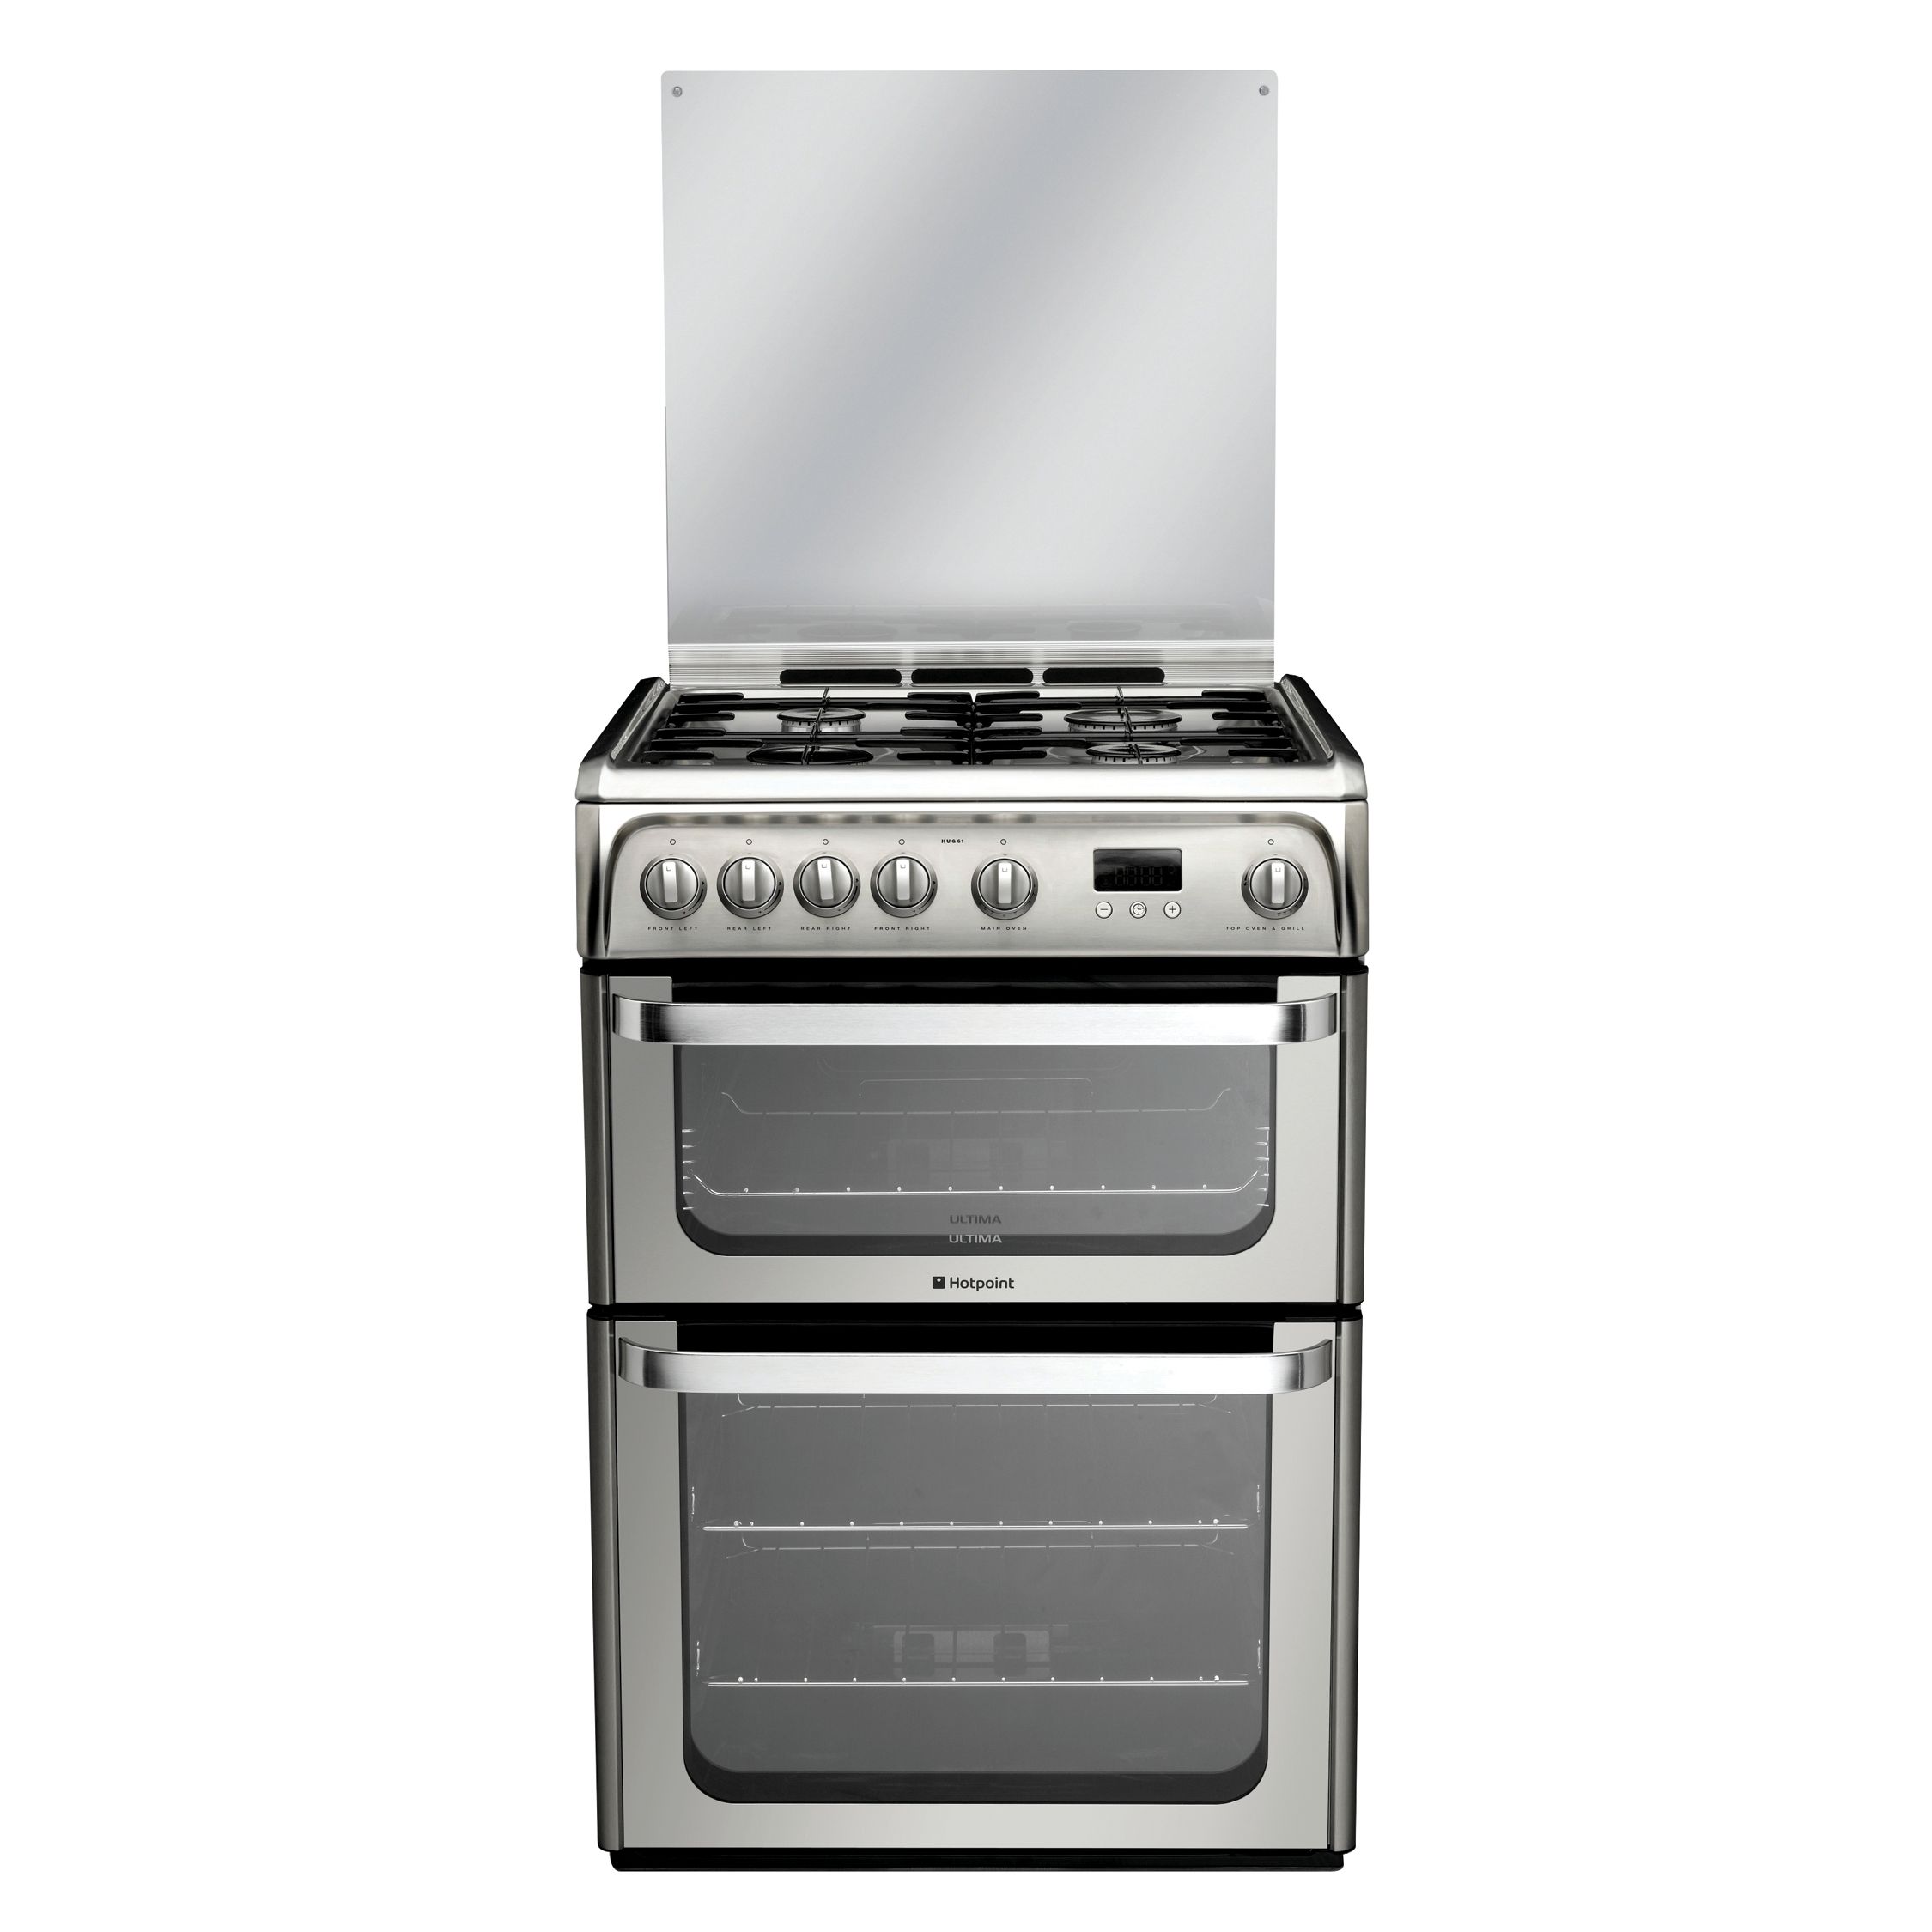 Hotpoint HUG61X Ultima Gas Cooker, Stainless Steel at John Lewis